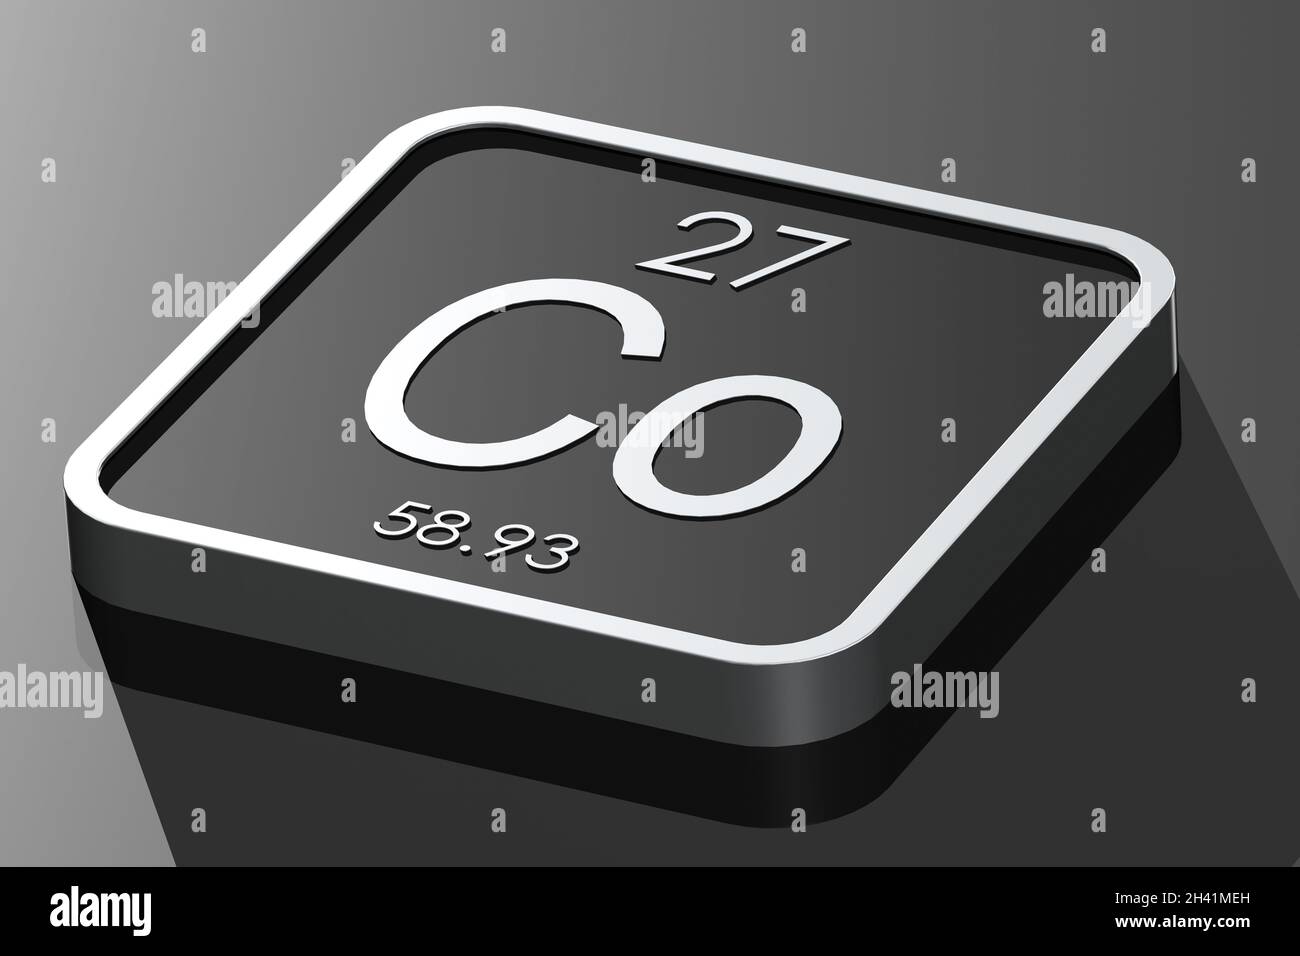 Cobalt element from periodic table on black square block Stock Photo